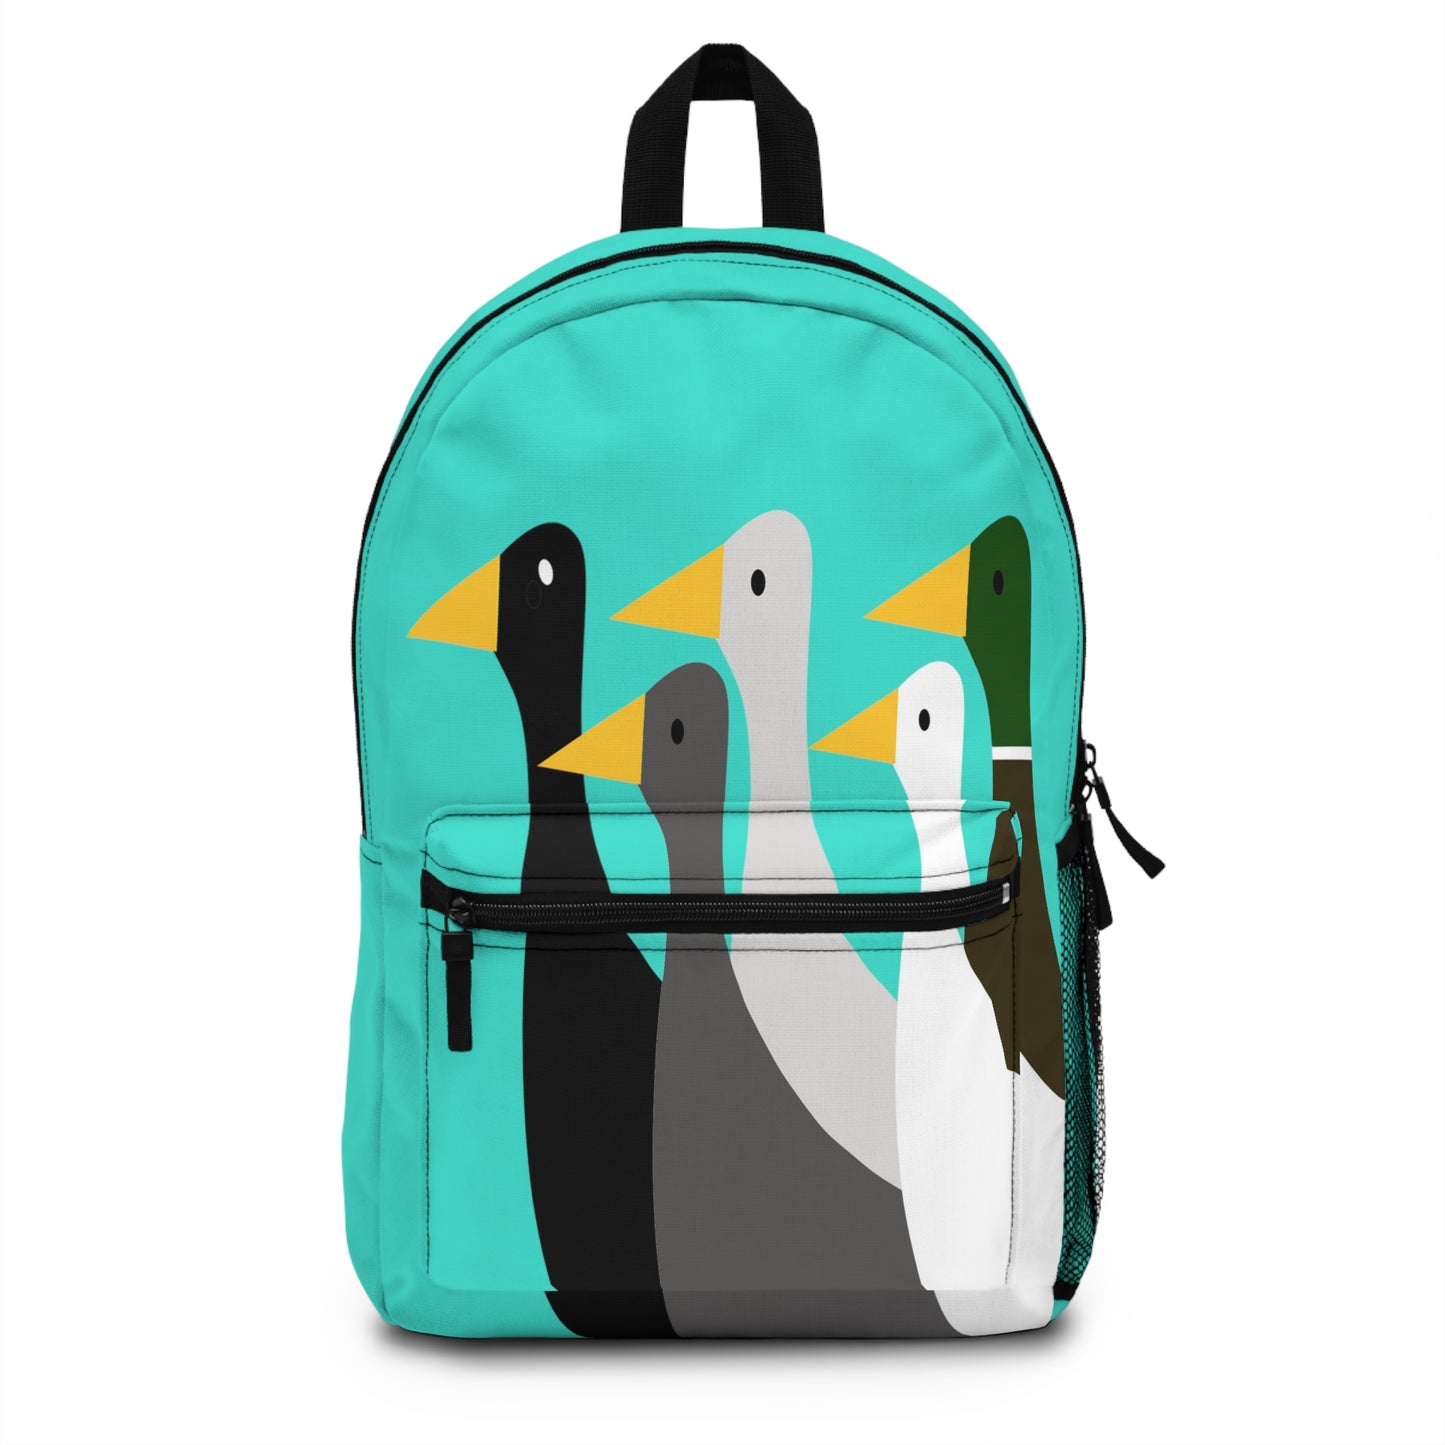 Bring the Ducks with you - Turquoise 40E0D0 - Backpack